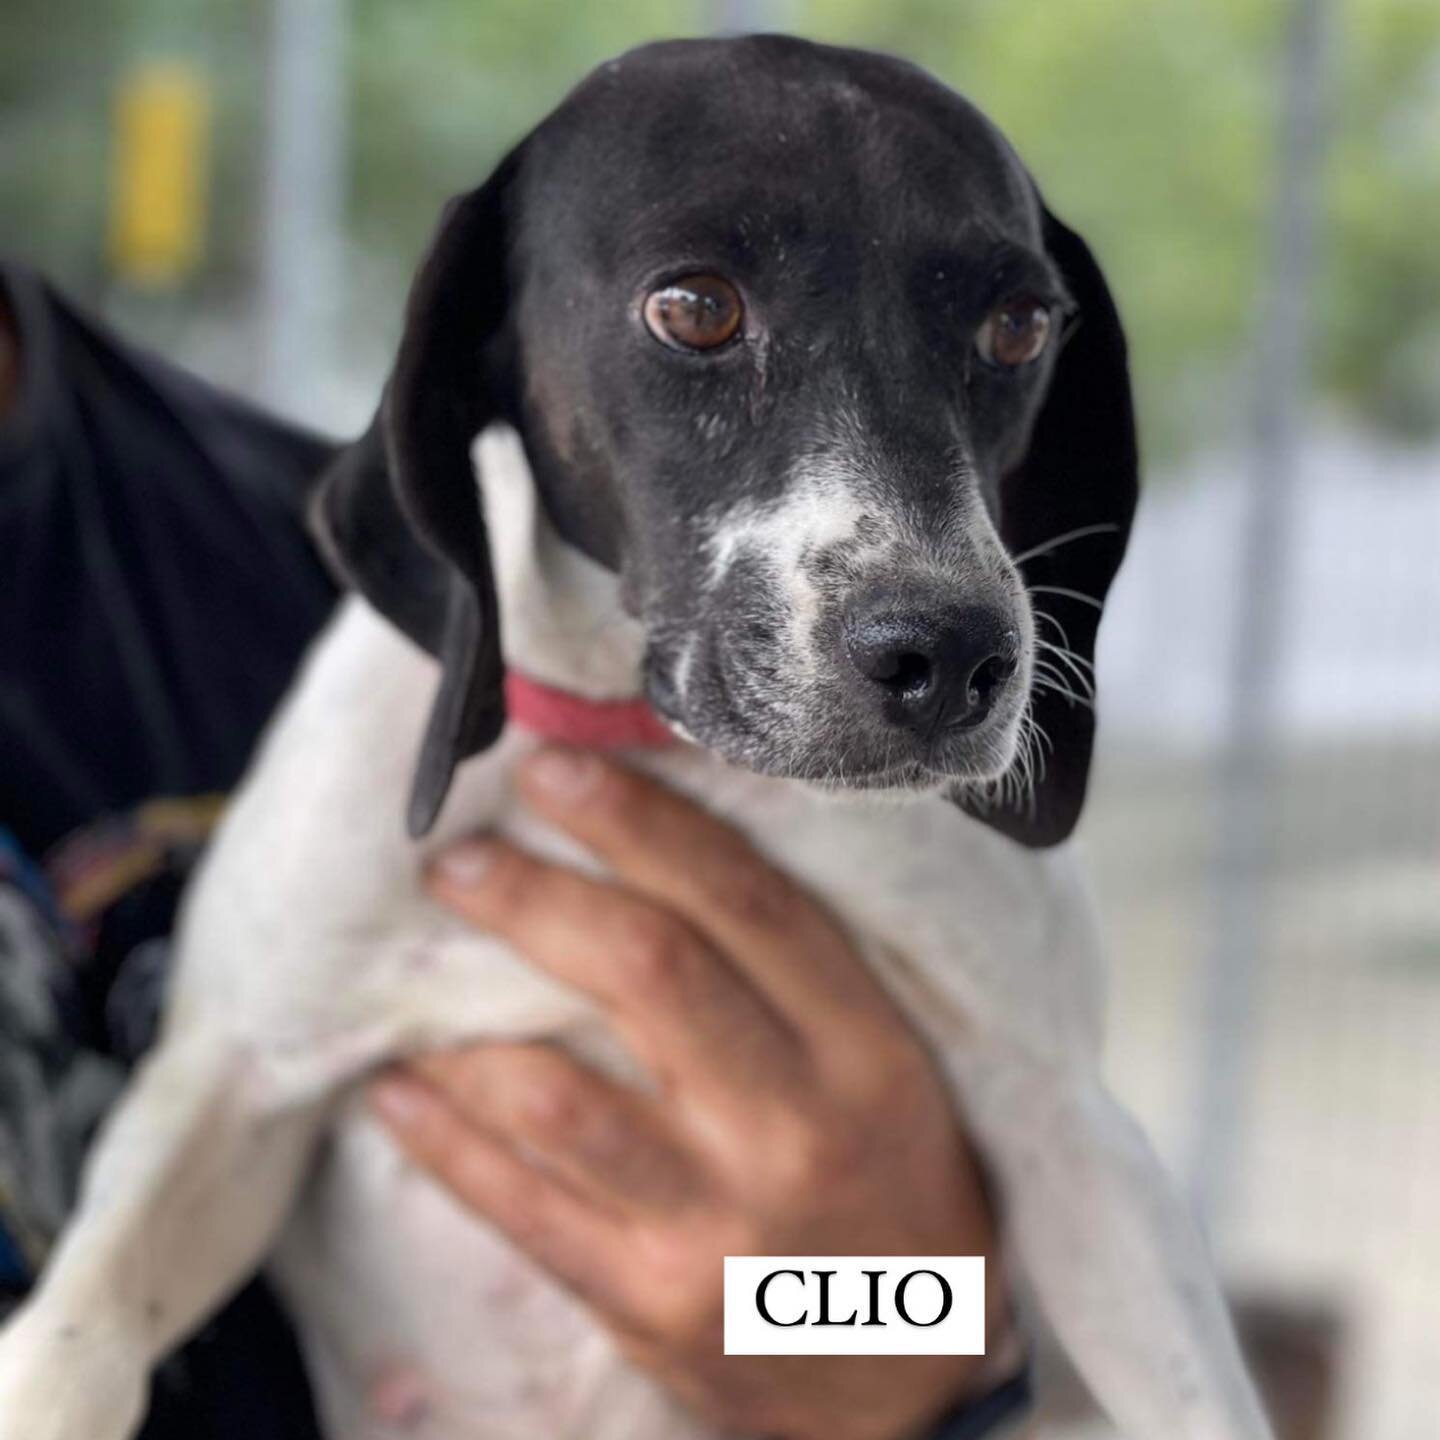 Meet CLIO! &hearts;️
A 4 year old pocket pointer just 12 kilos! Rescued from a farm where she gave birth to 4 puppies and they were living in appalling conditions!  They were all removed but unfortunately 2 of the puppies did not make it! She is now 